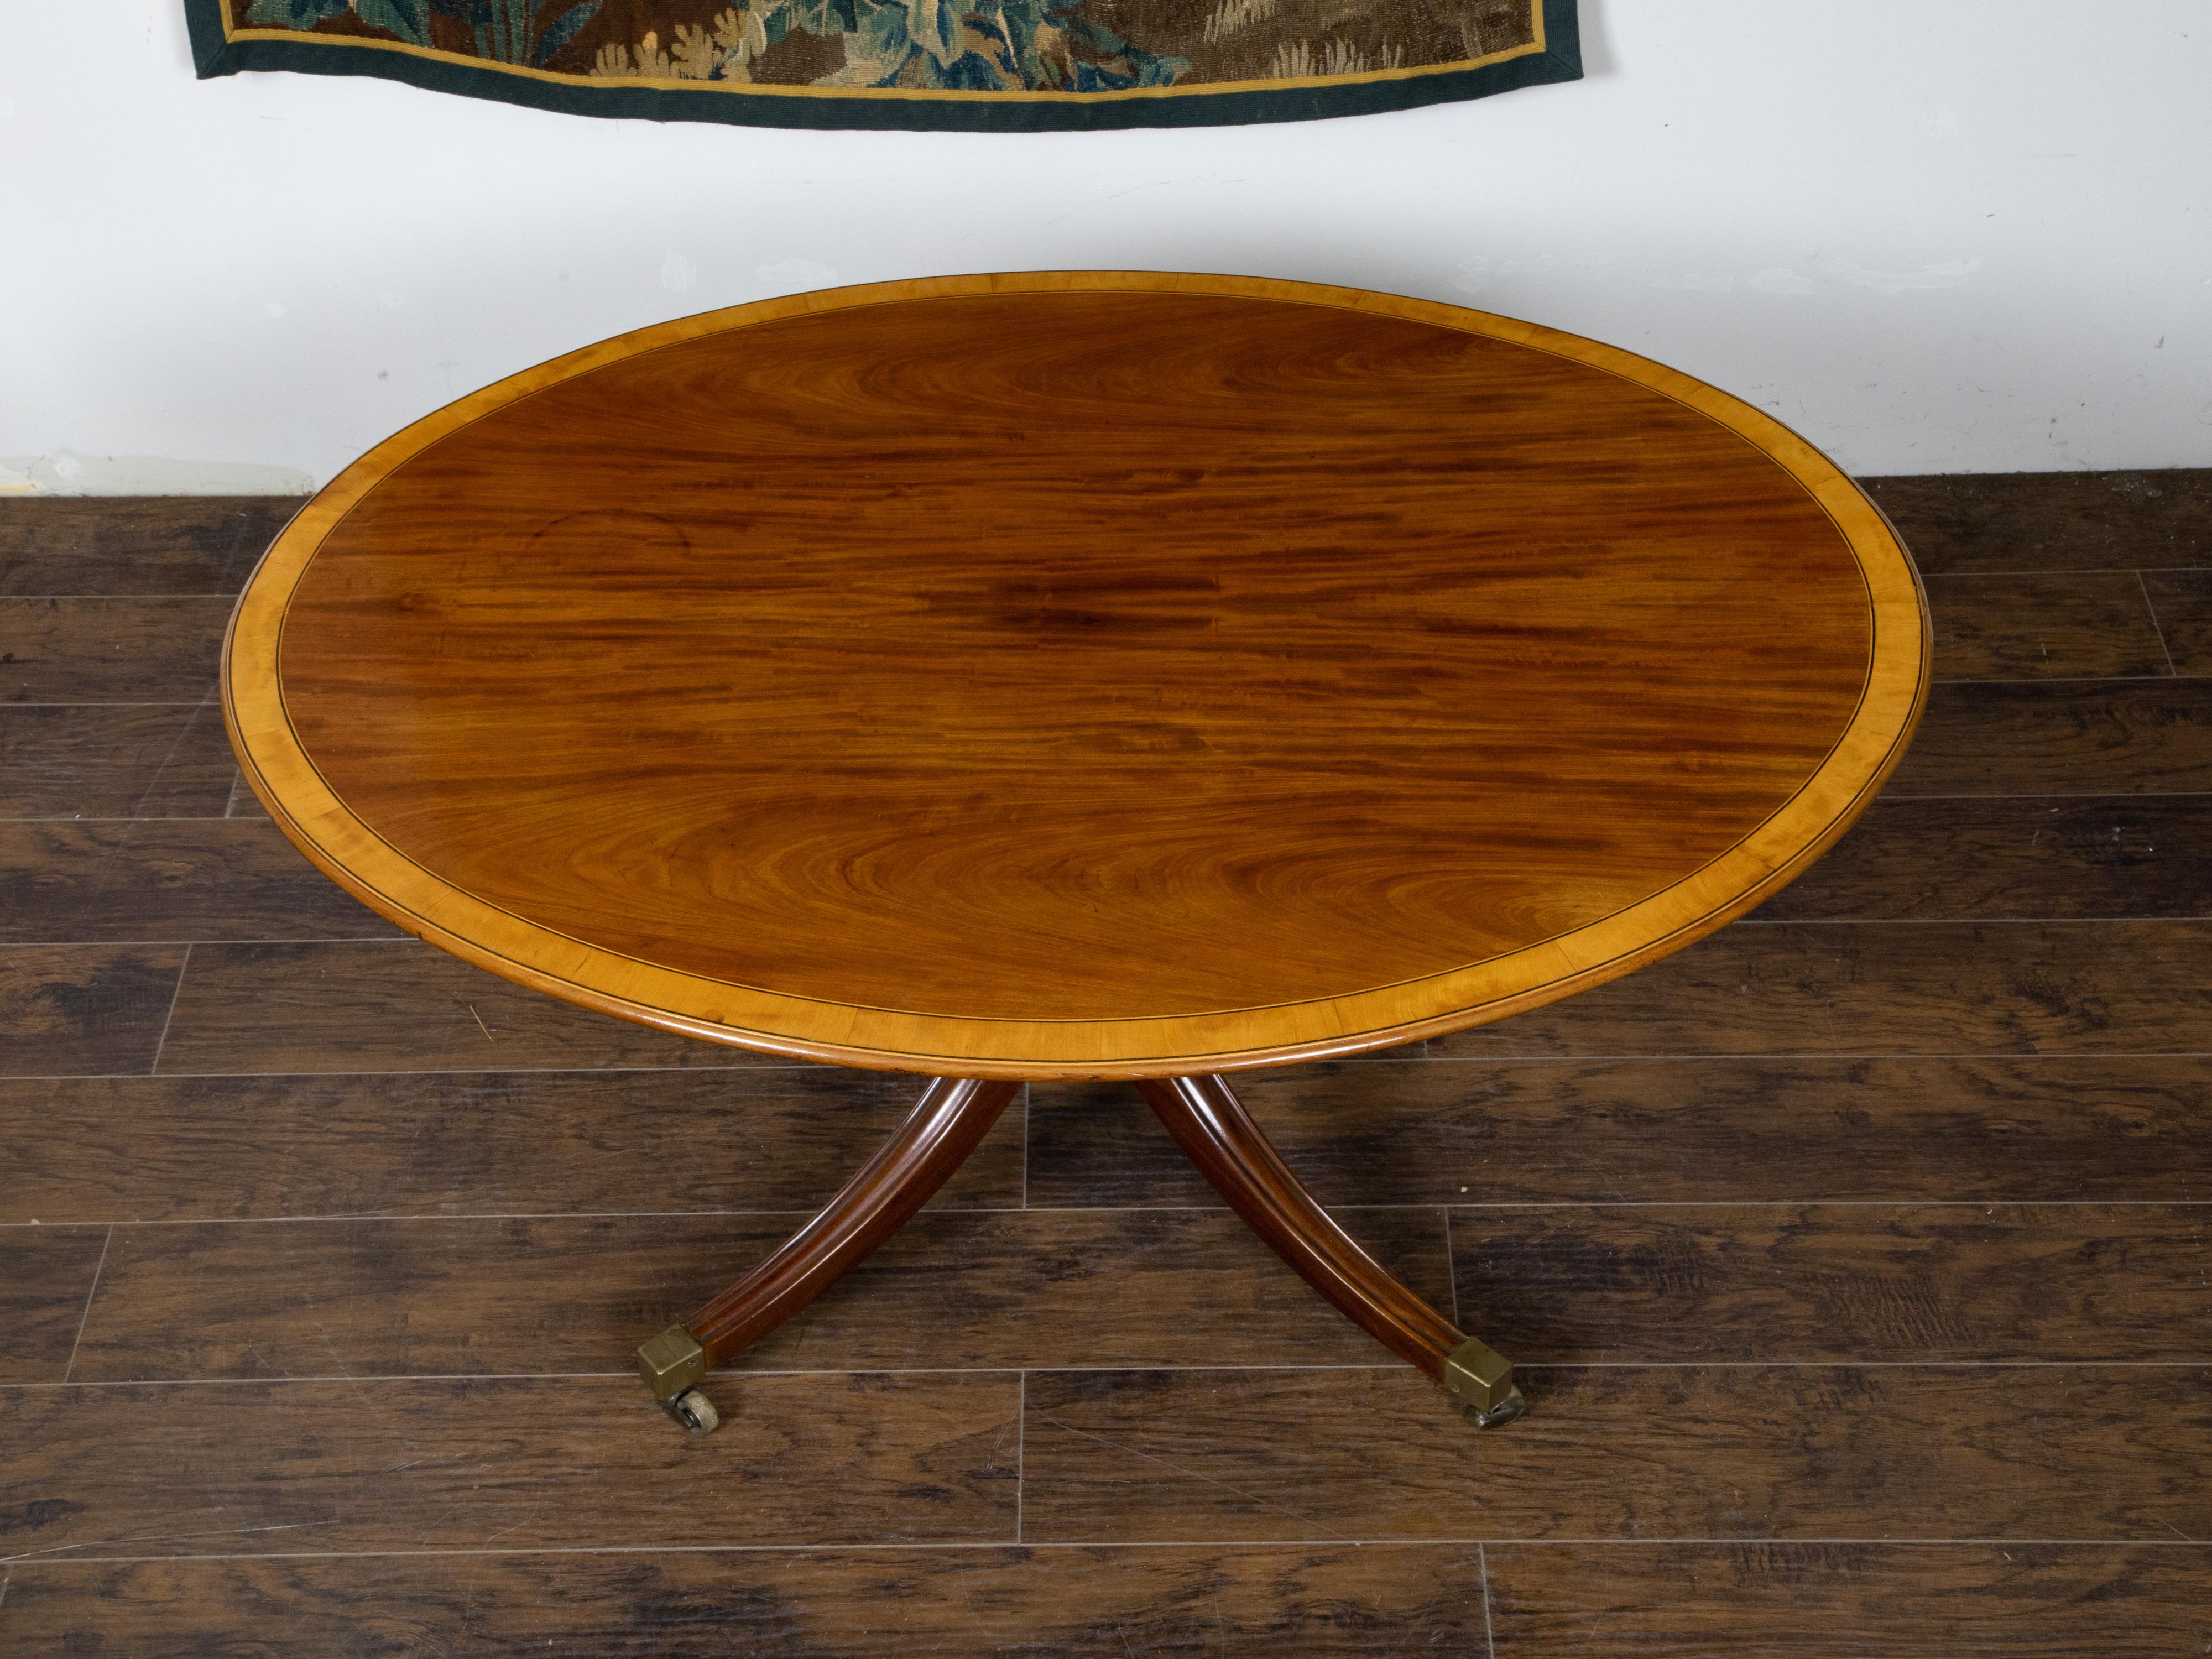 English Mahogany 1840s Oval Top Pedestal Table with Quadripod Base and Casters For Sale 3